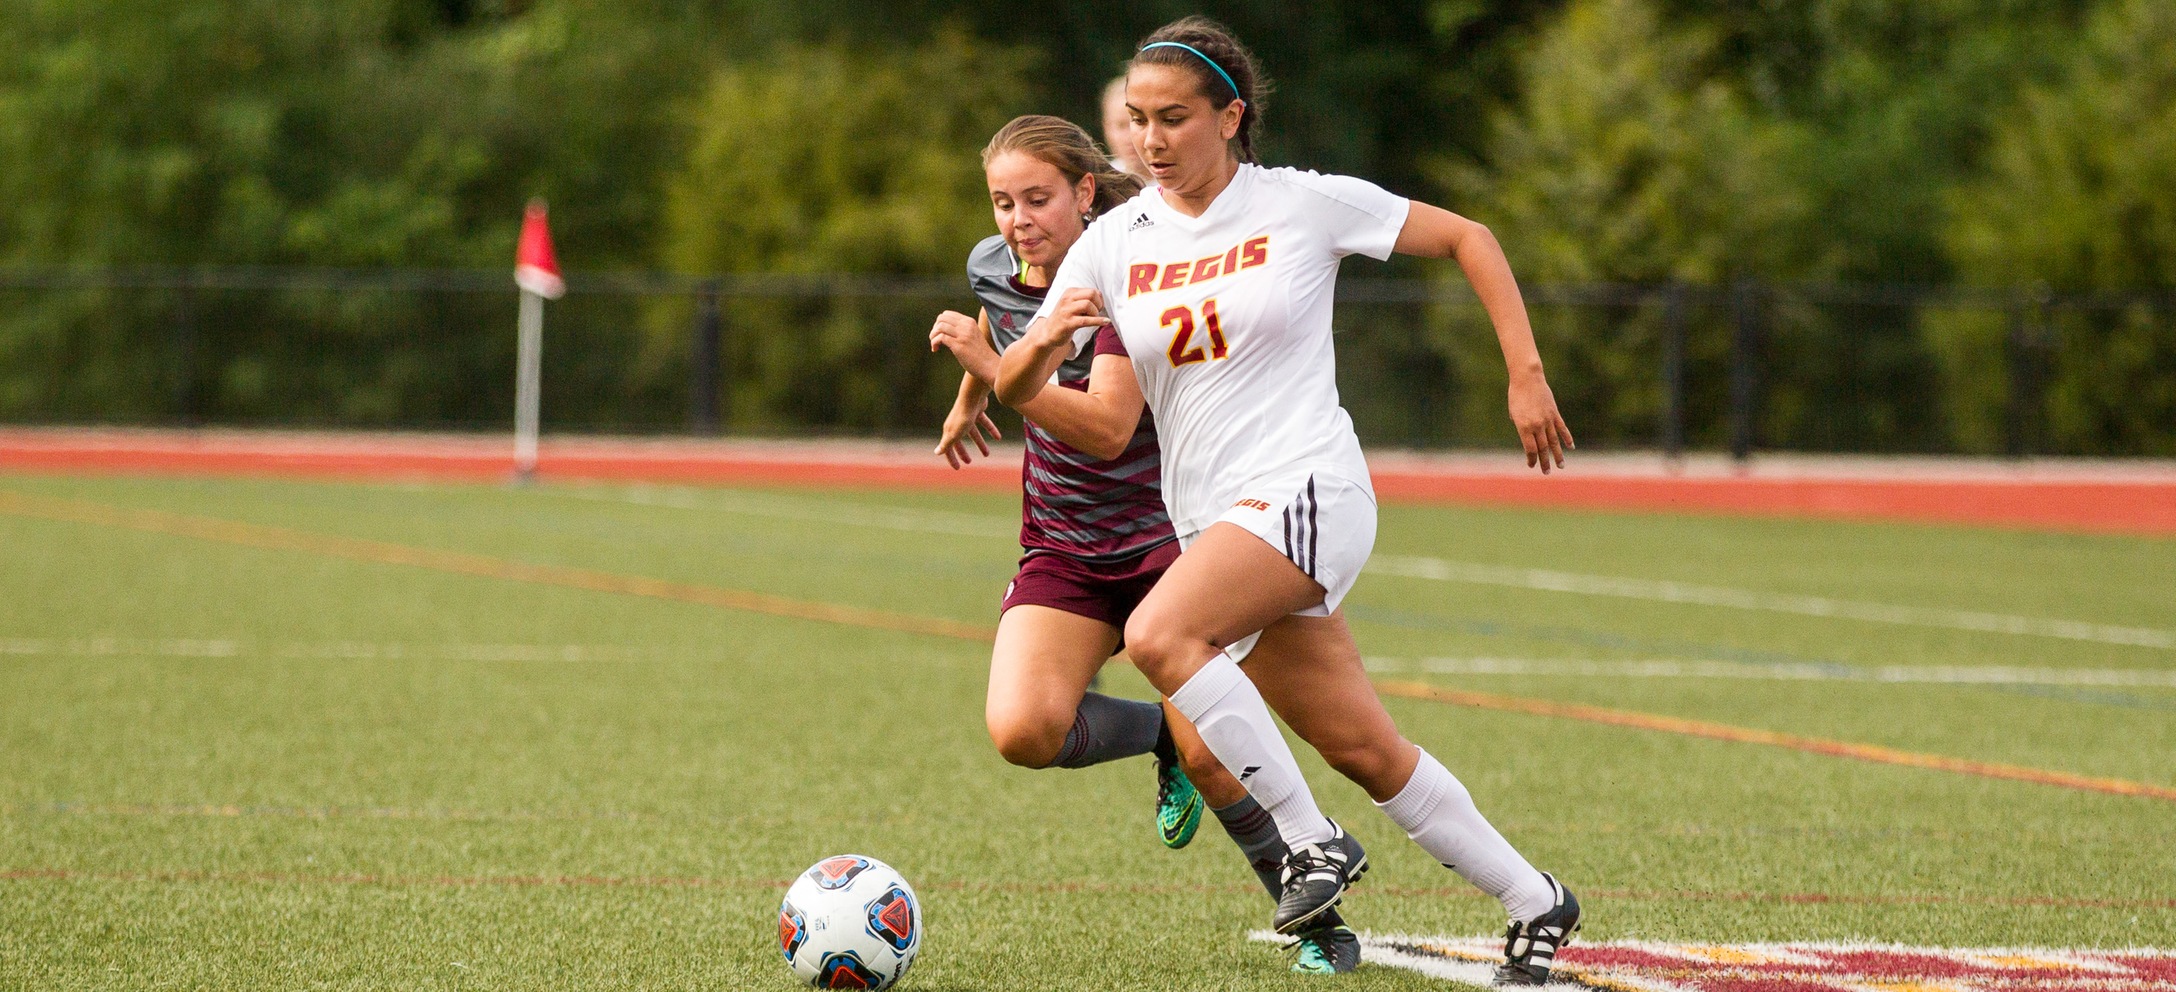 Regis Women’s Soccer Rallies for 3-2 Victory on Road